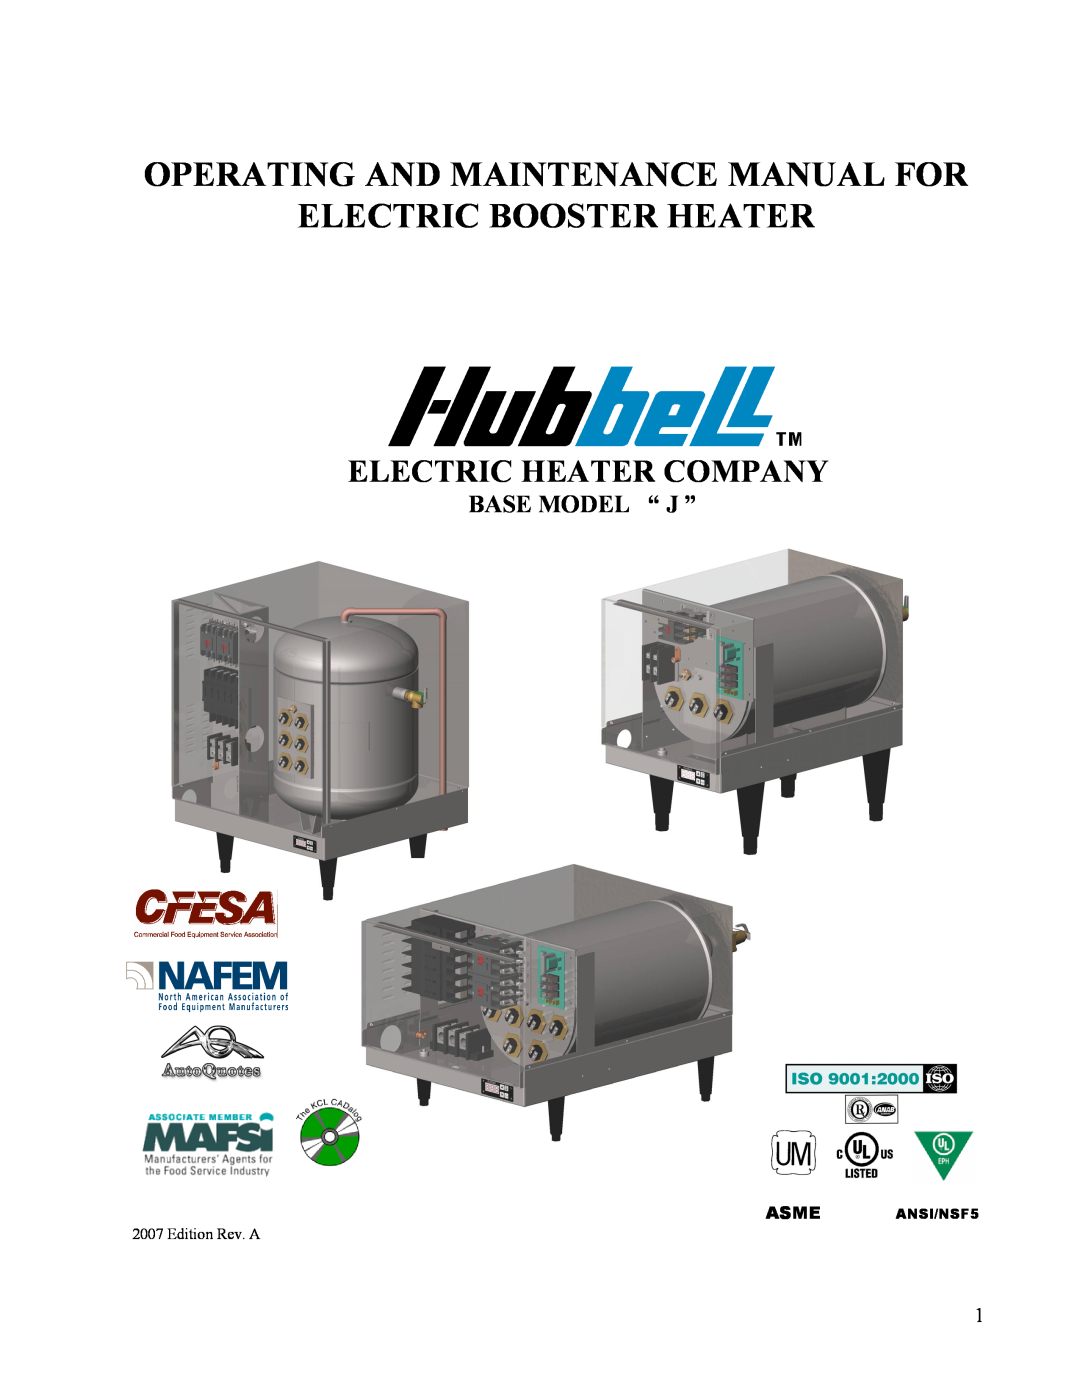 Hubbell Electric Heater Company manual Operating And Maintenance Manual For, Electric Booster Heater, Base Model “ J ” 